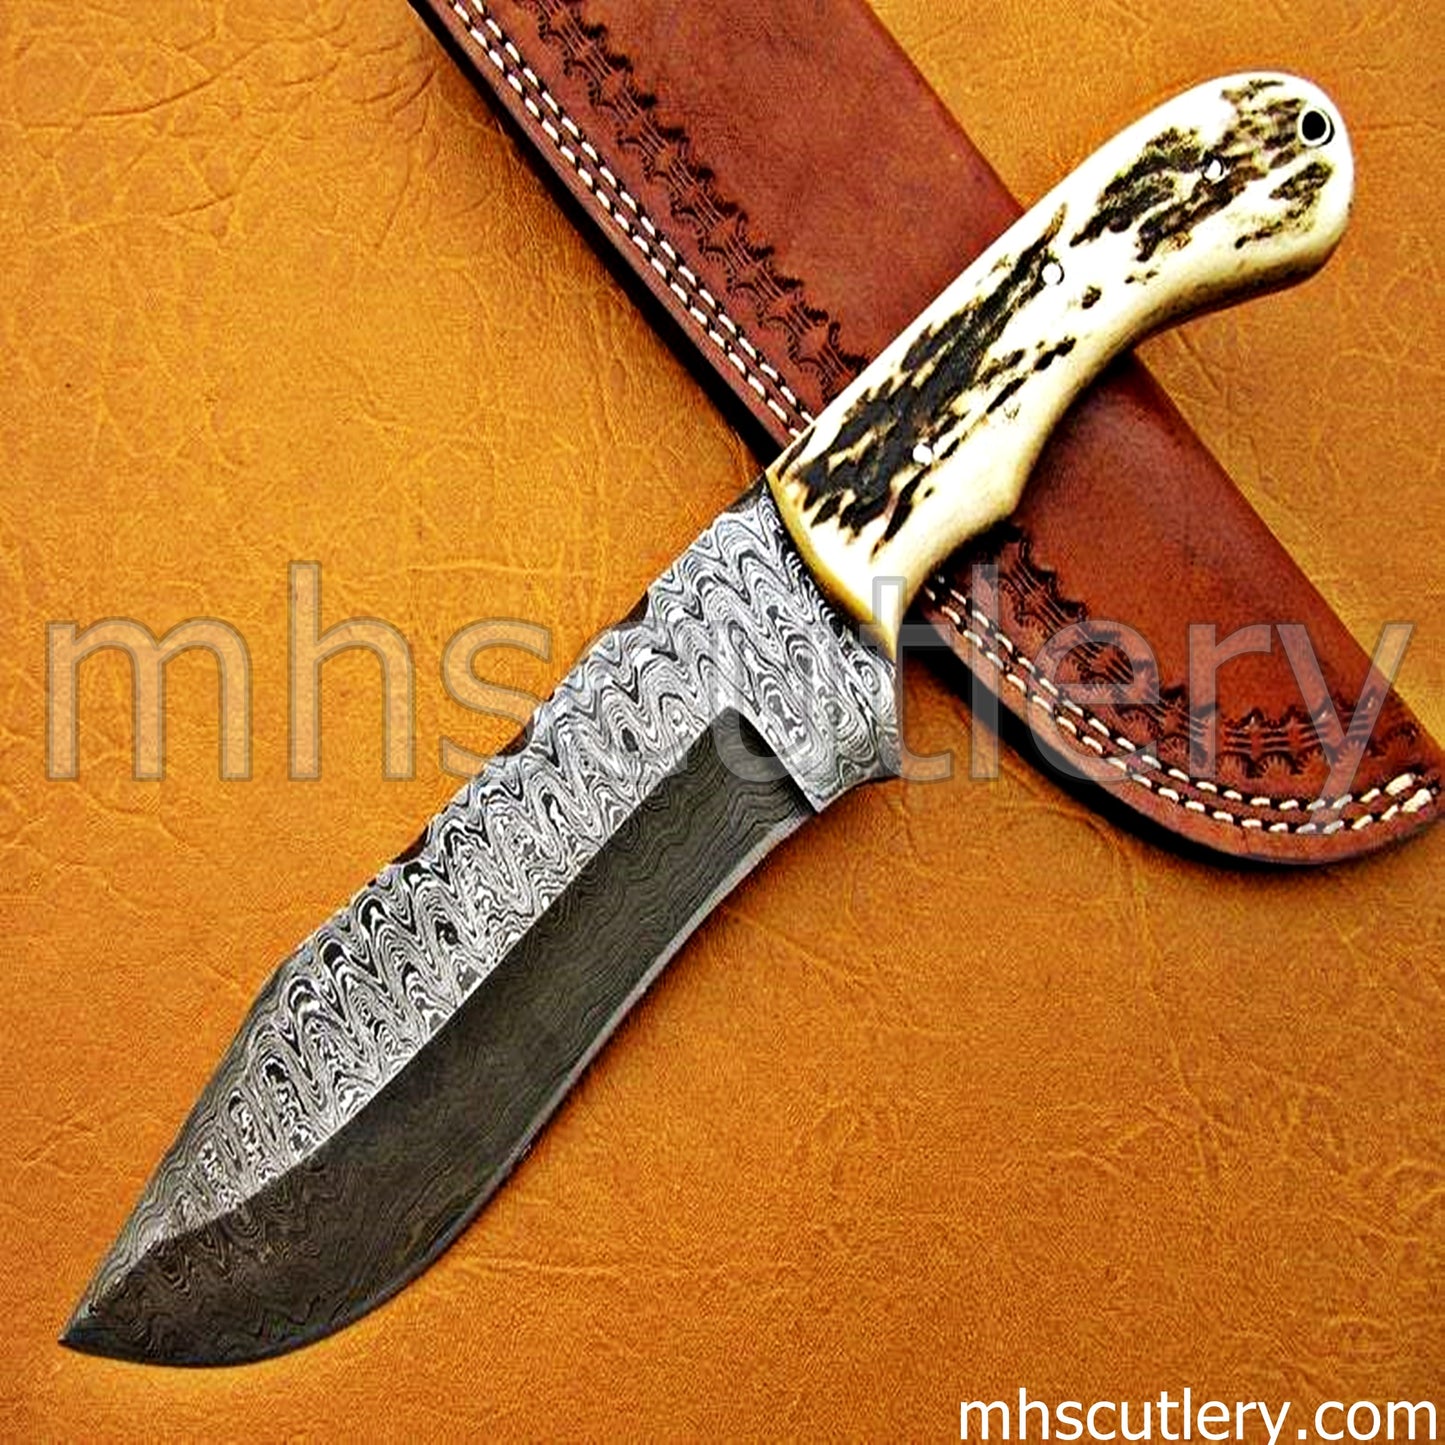 Handmade Ladder Damascus Steel Tactical Hunting Knife / Stag Handle | mhscutlery